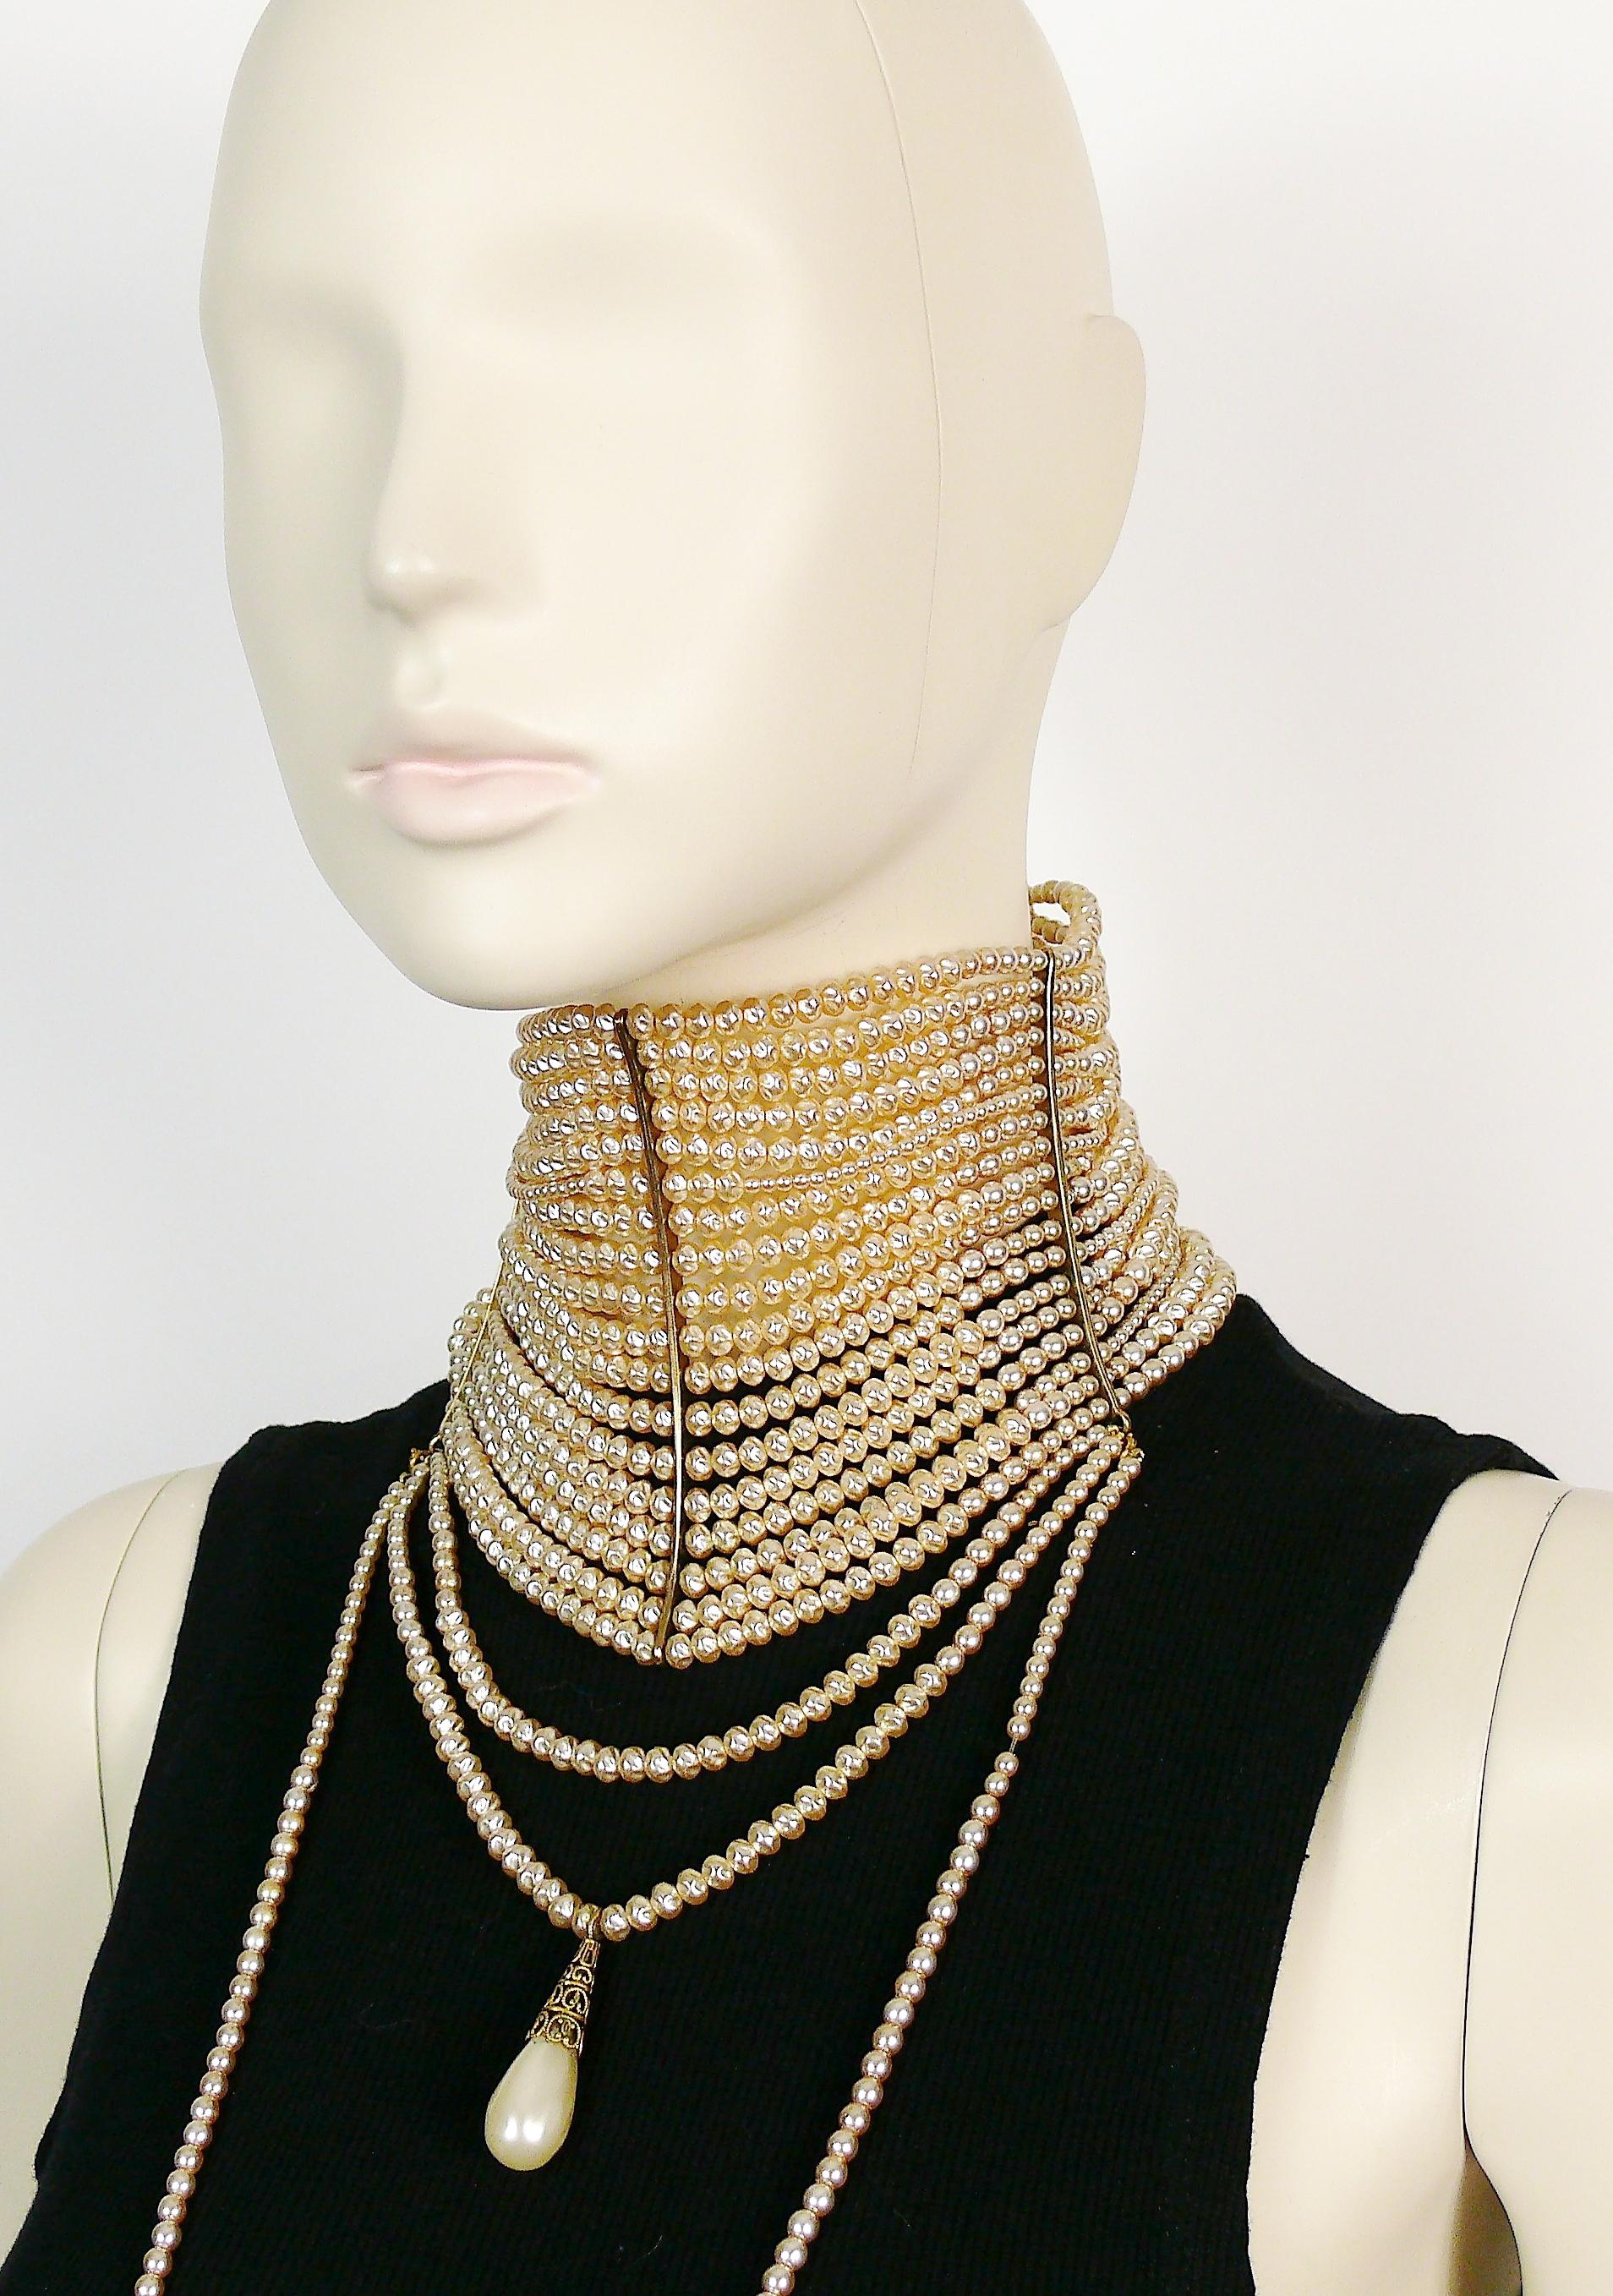 Christian Dior 1998 Documented Multi Strand Edwardian Pearl Choker Necklace 3